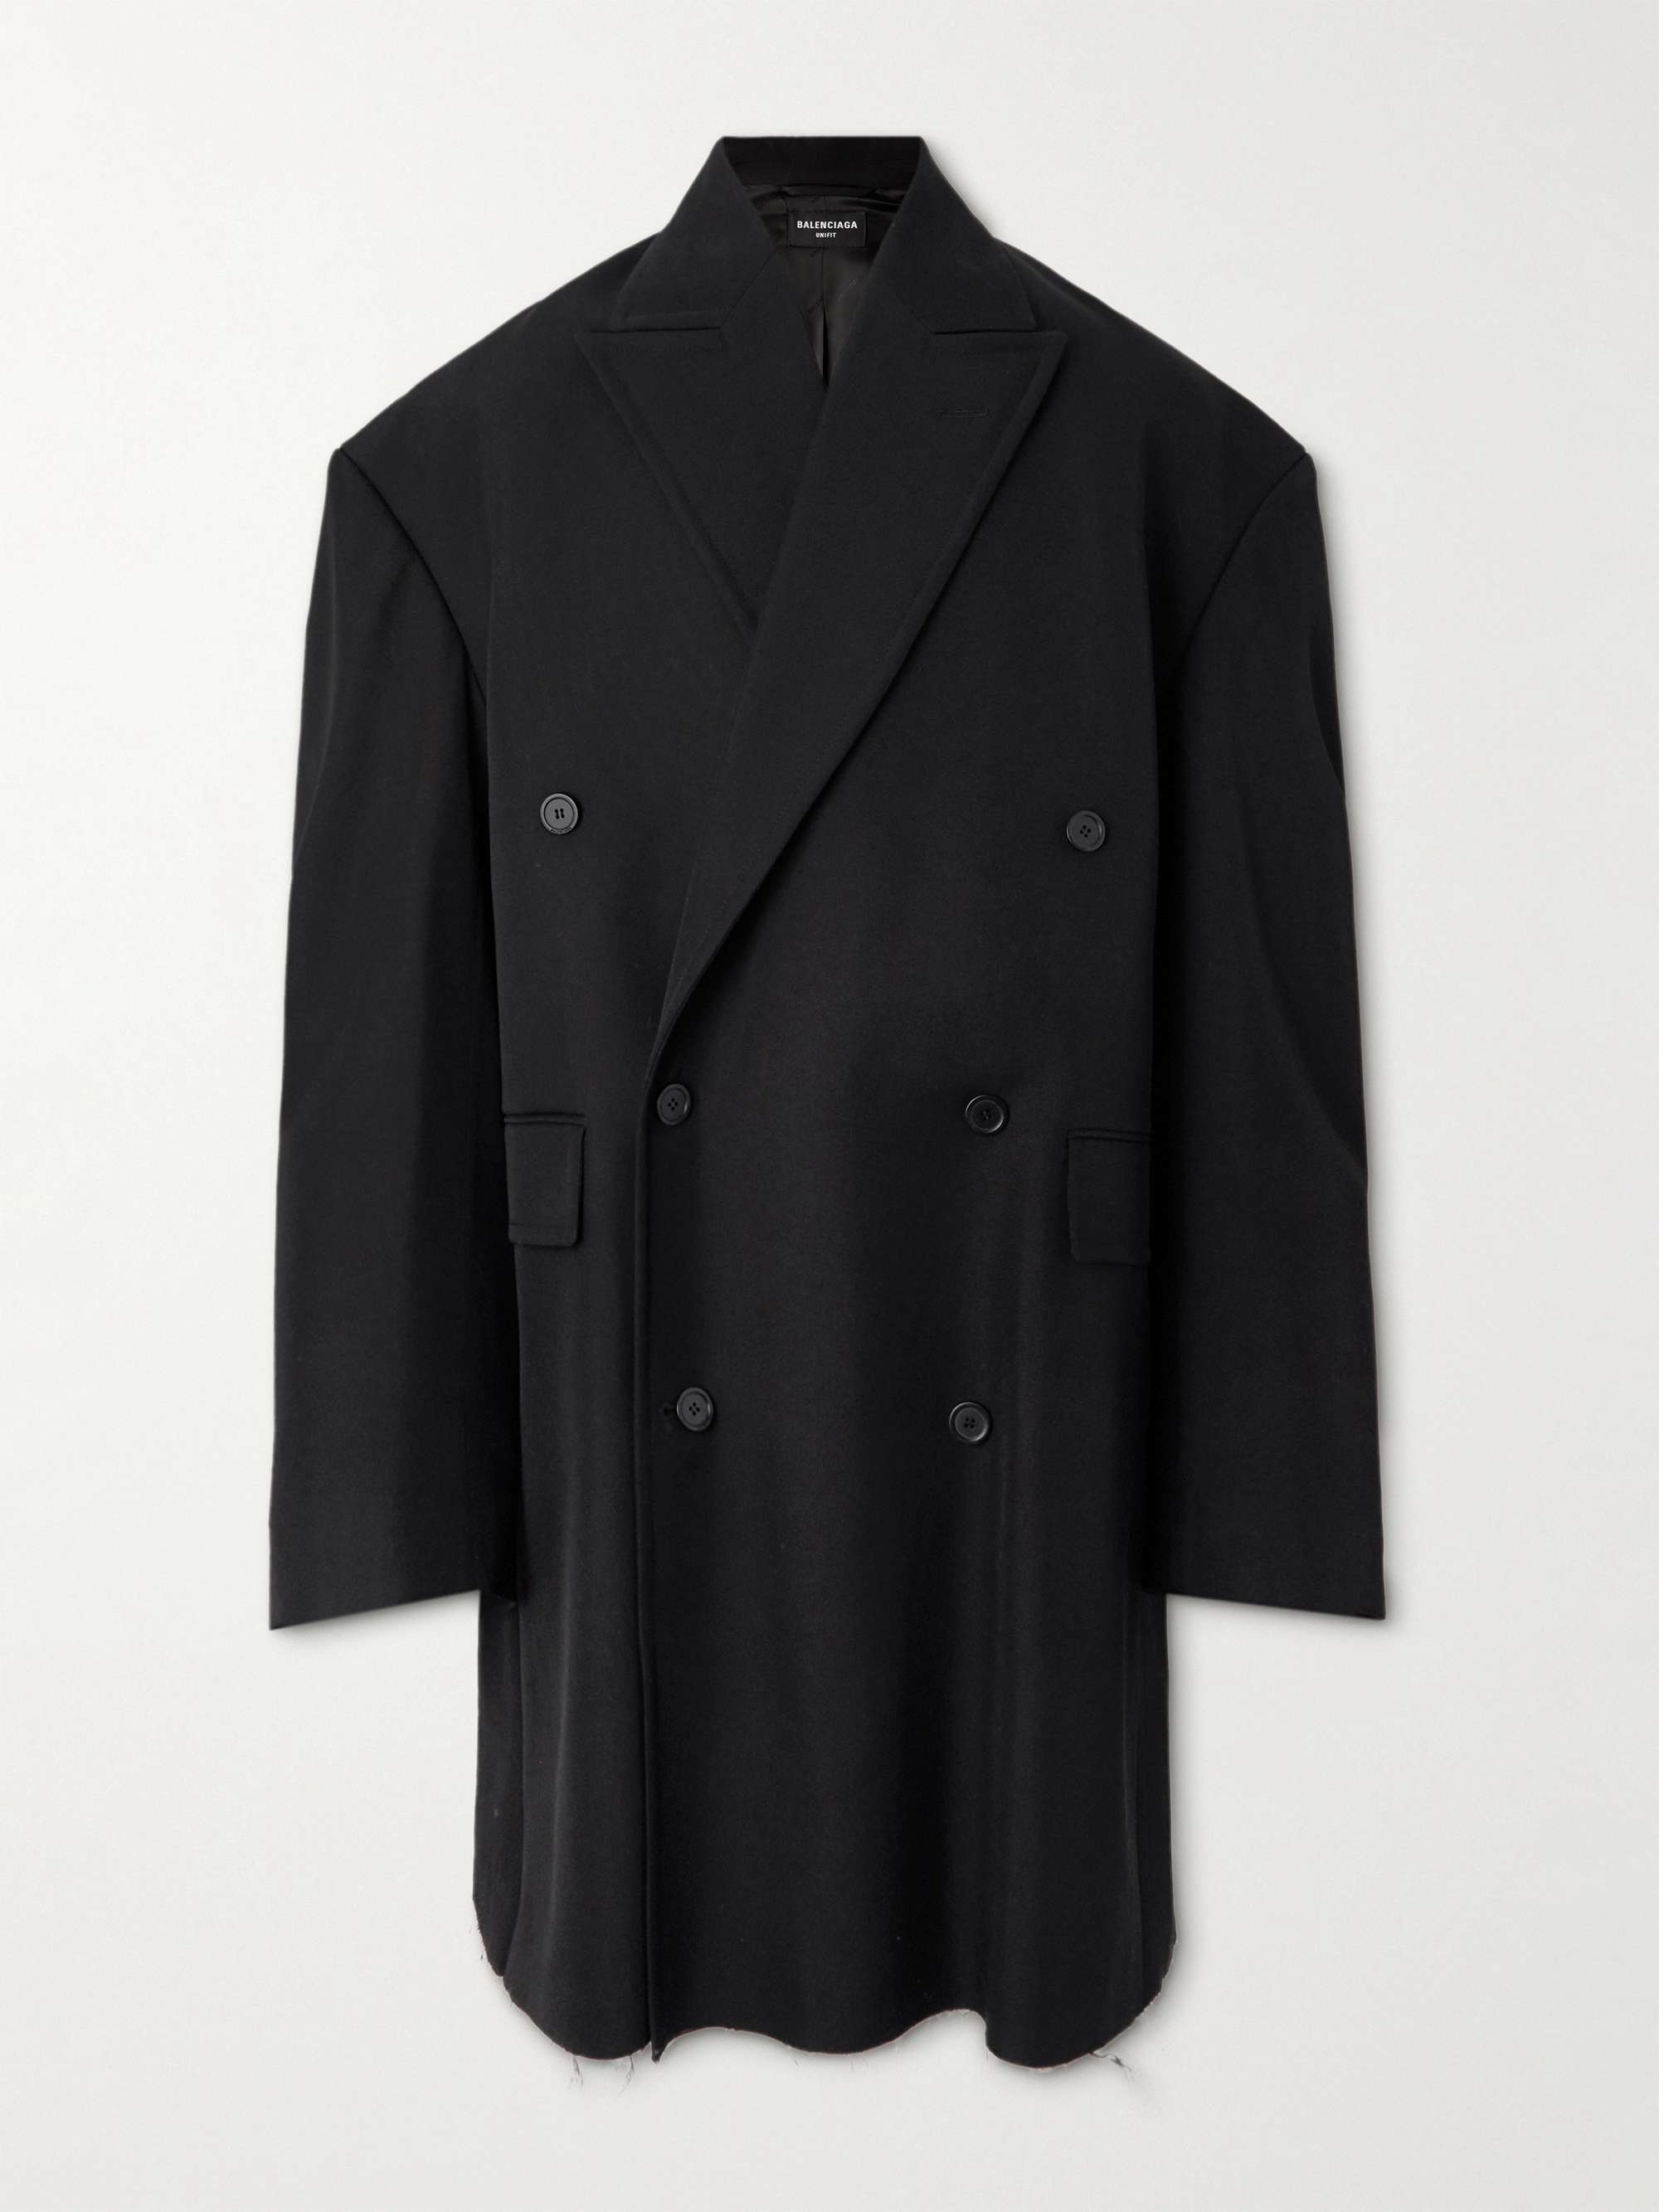 BALENCIAGA Oversized Double-Breasted Wool-Blend Coat | MR PORTER